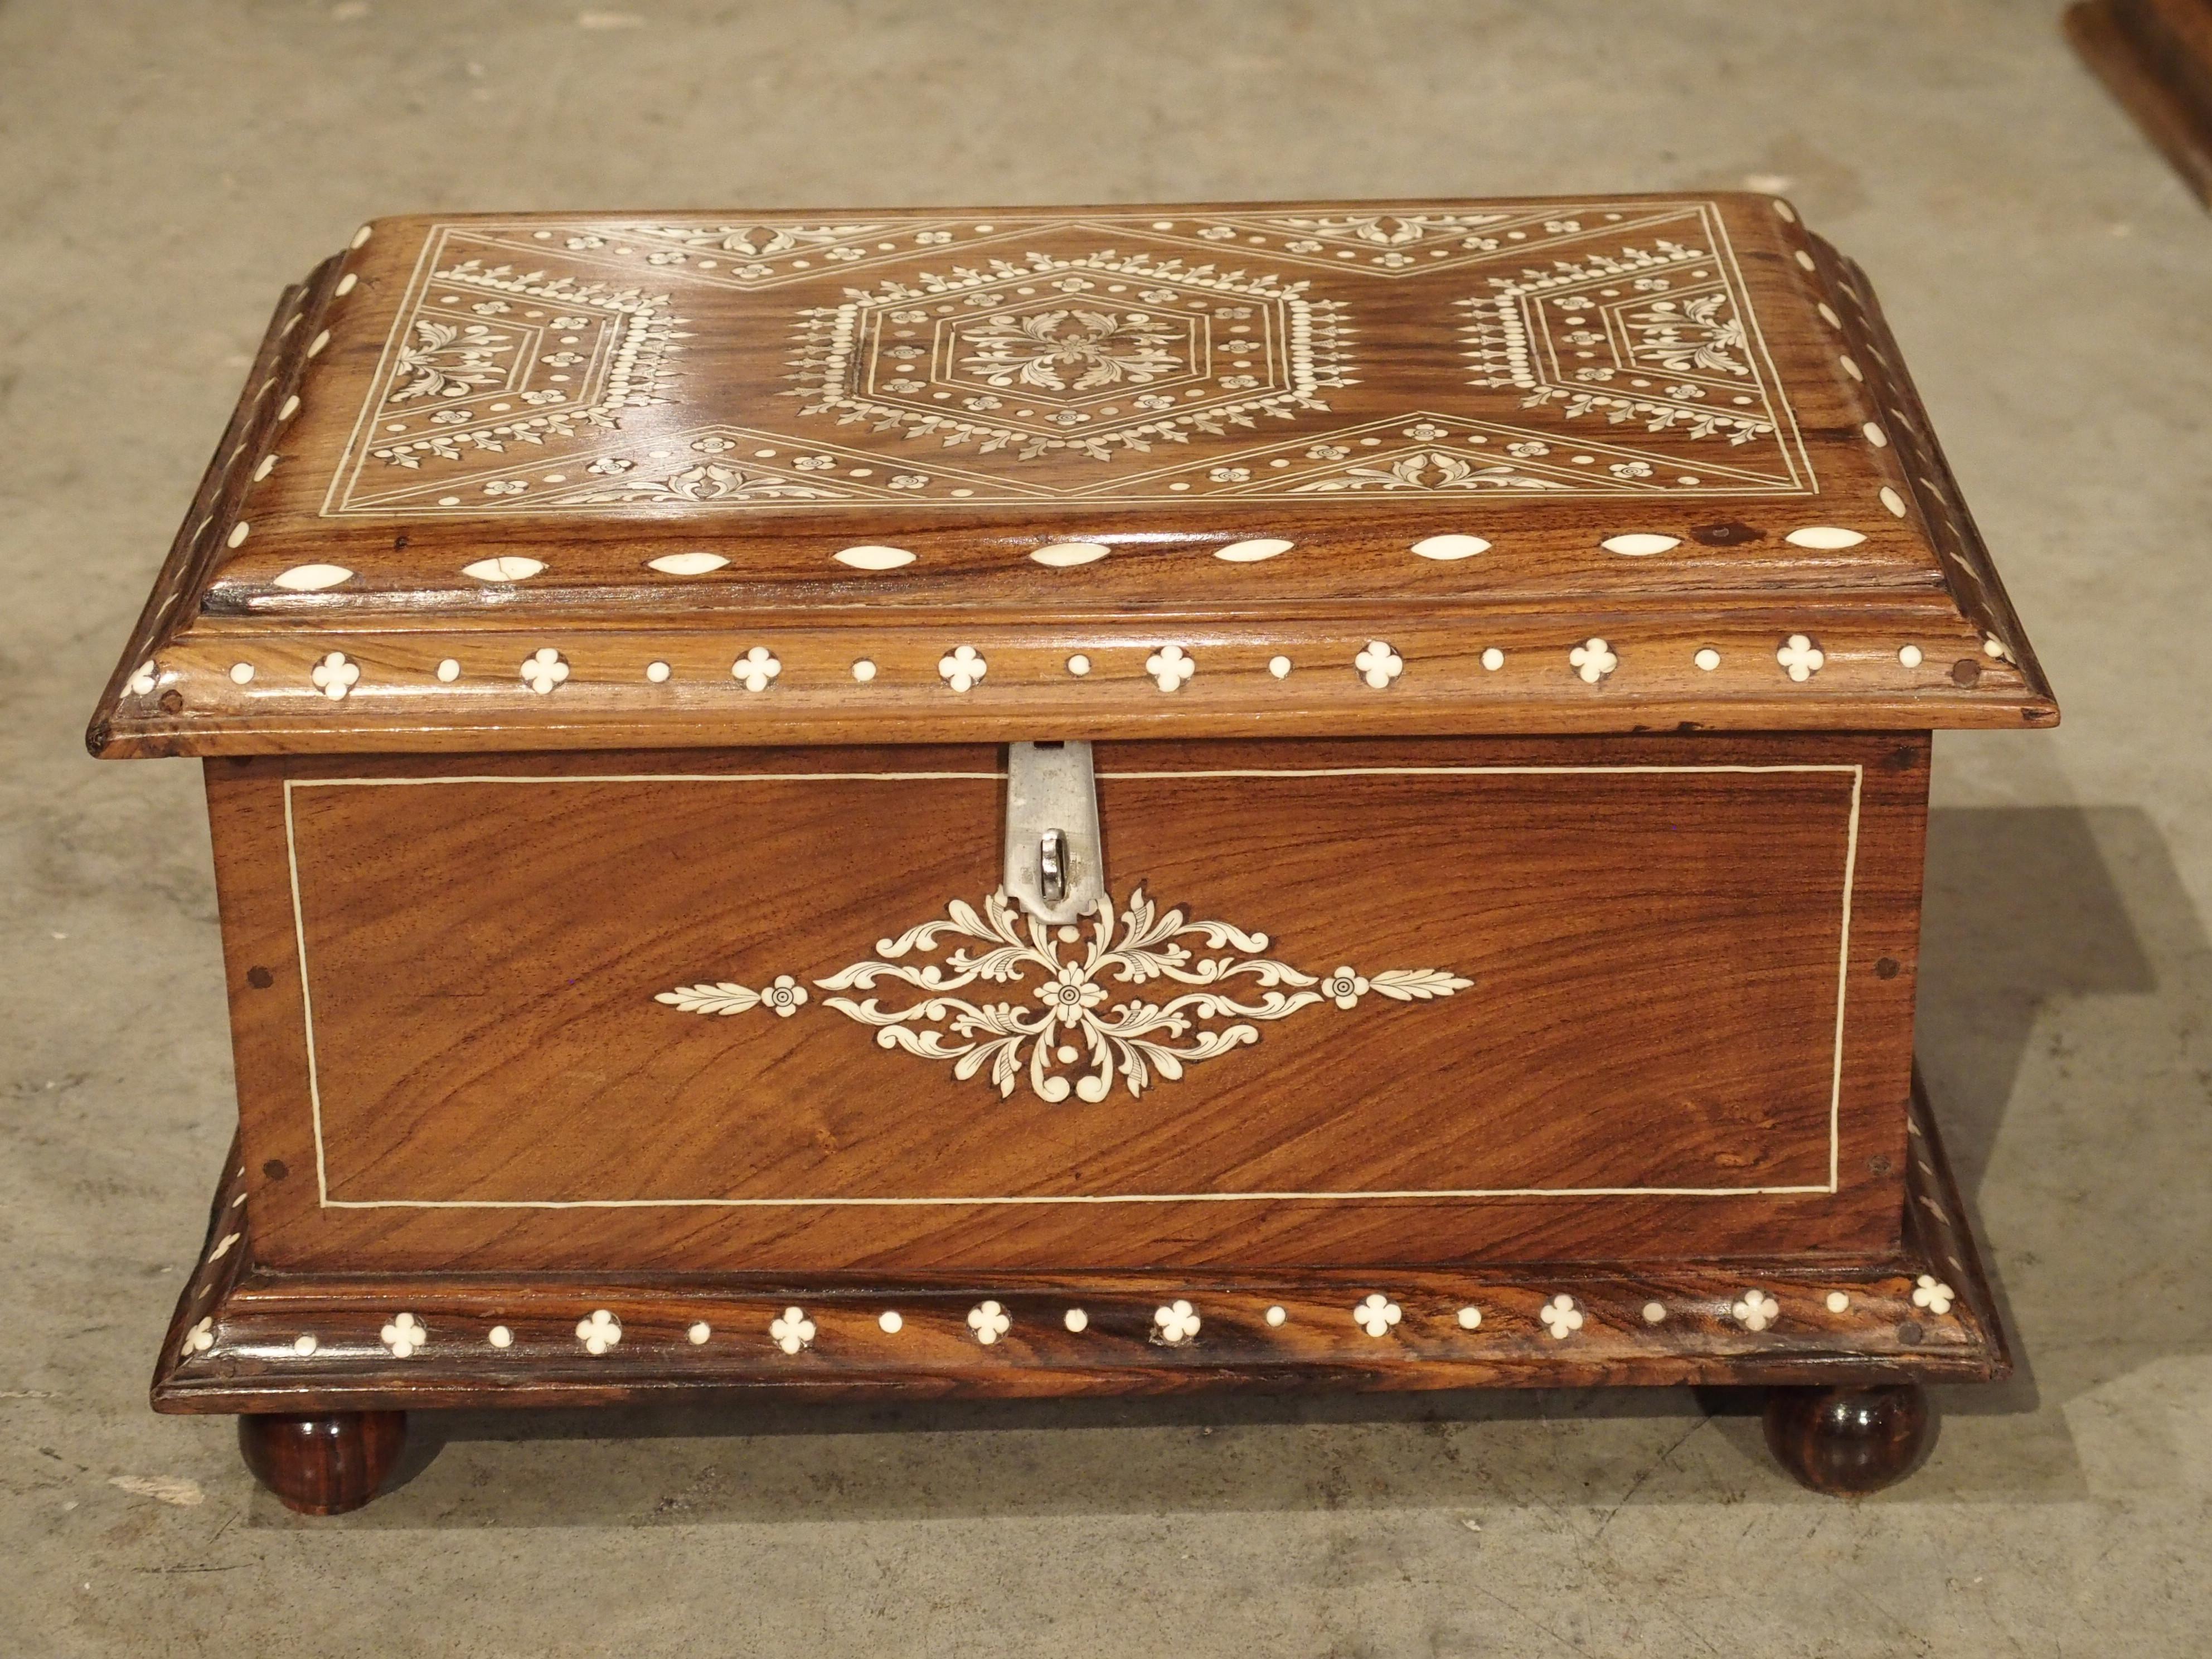 Hand-Carved Antique Bone Inlaid Table Trunk from Southern Iberia, 19th Century